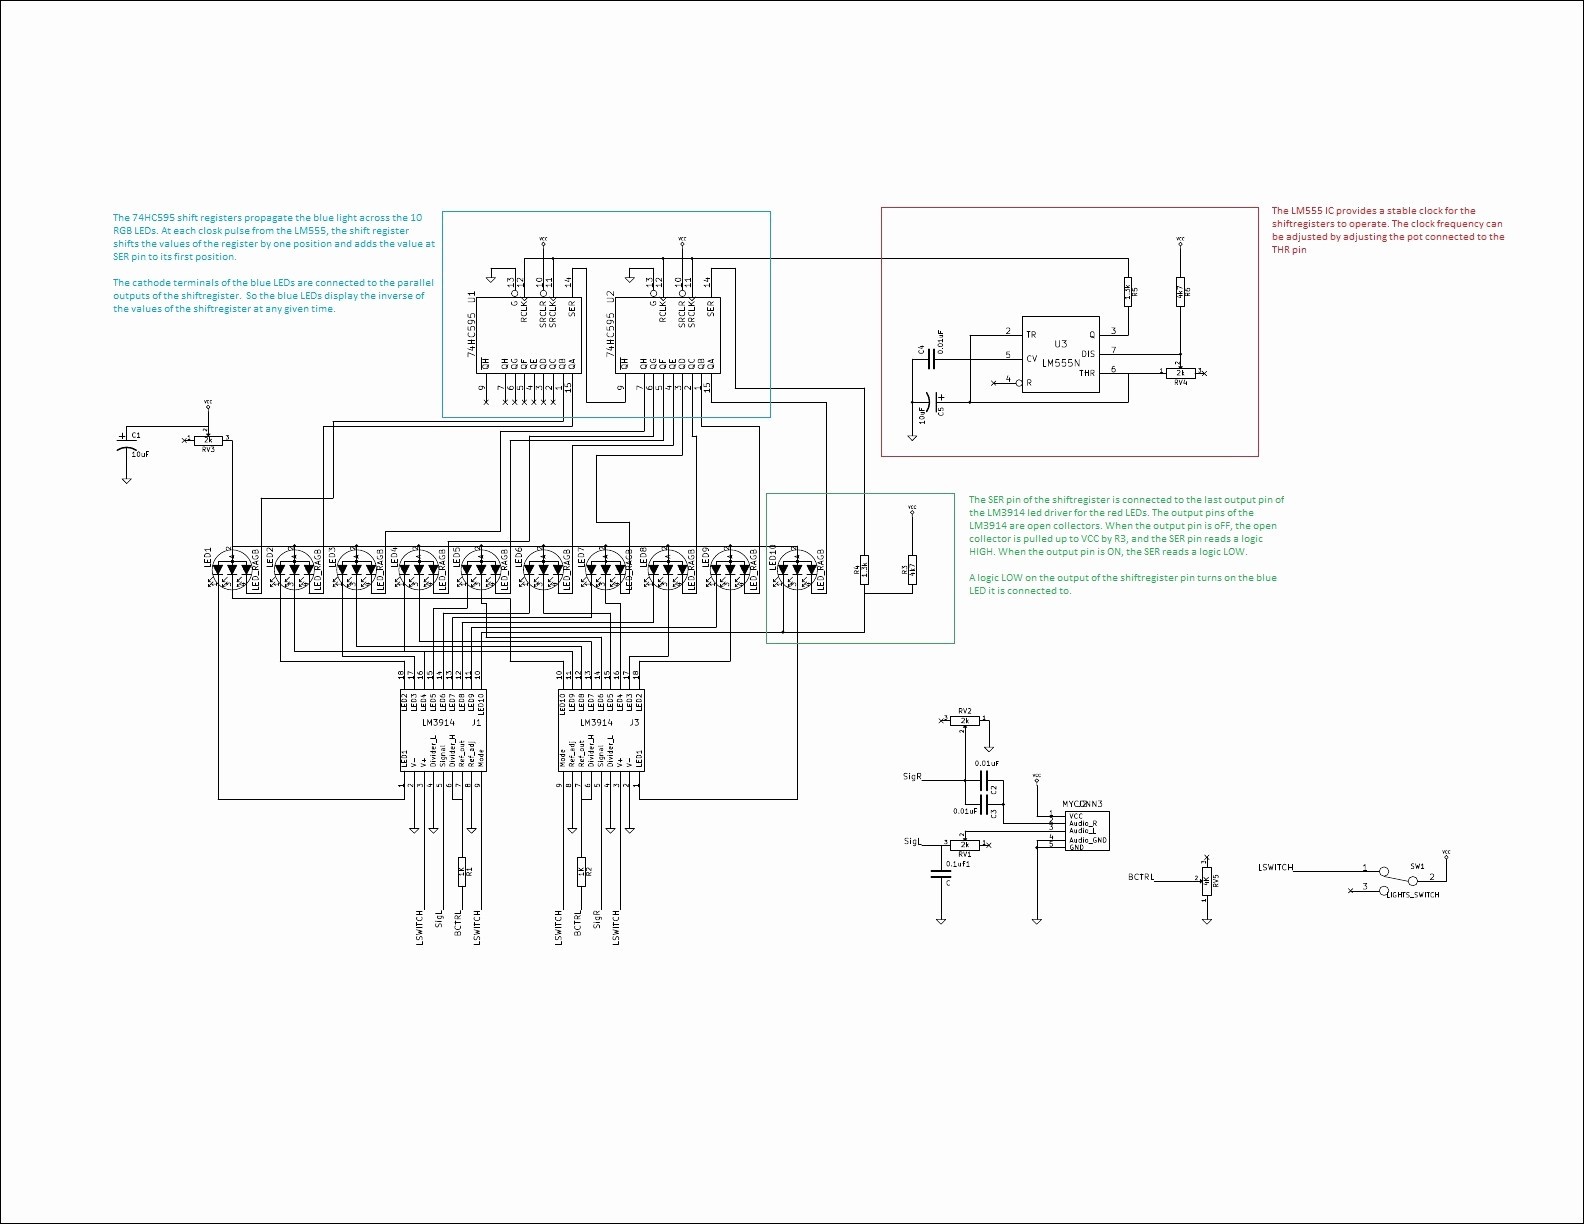 Low Voltage Outdoor Lighting Wiring Diagram Reference 0 10 Volt Dimming Wiring Diagram Lovely Low Voltage Outdoor Lighting